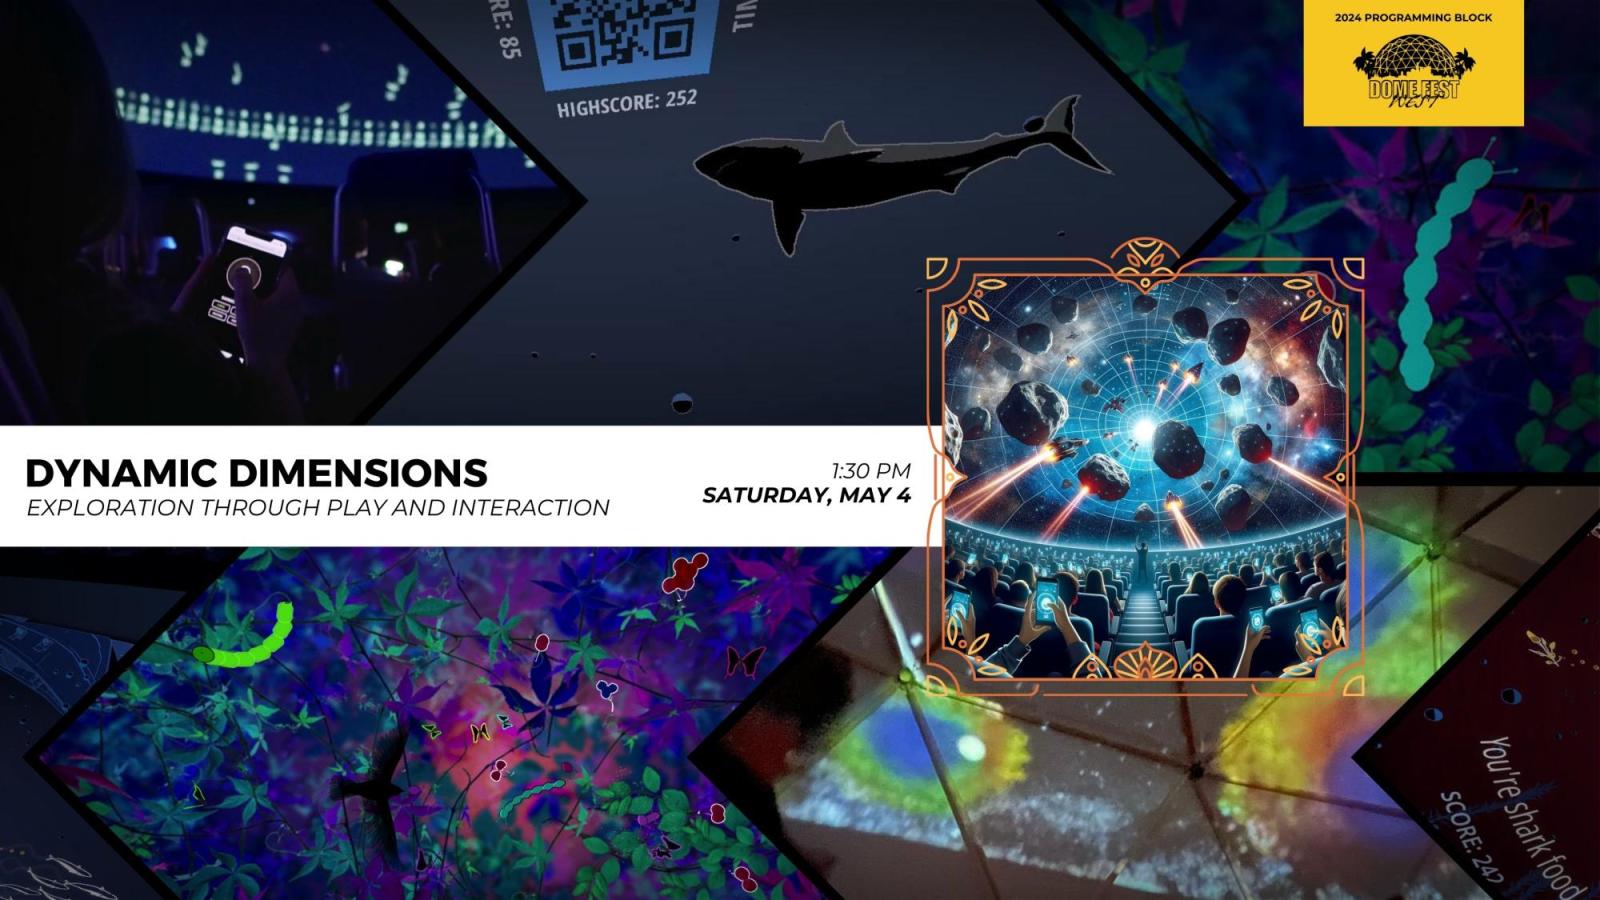 Dynamic Dimensions text with Dome Fest West logo and 5 still images from the films